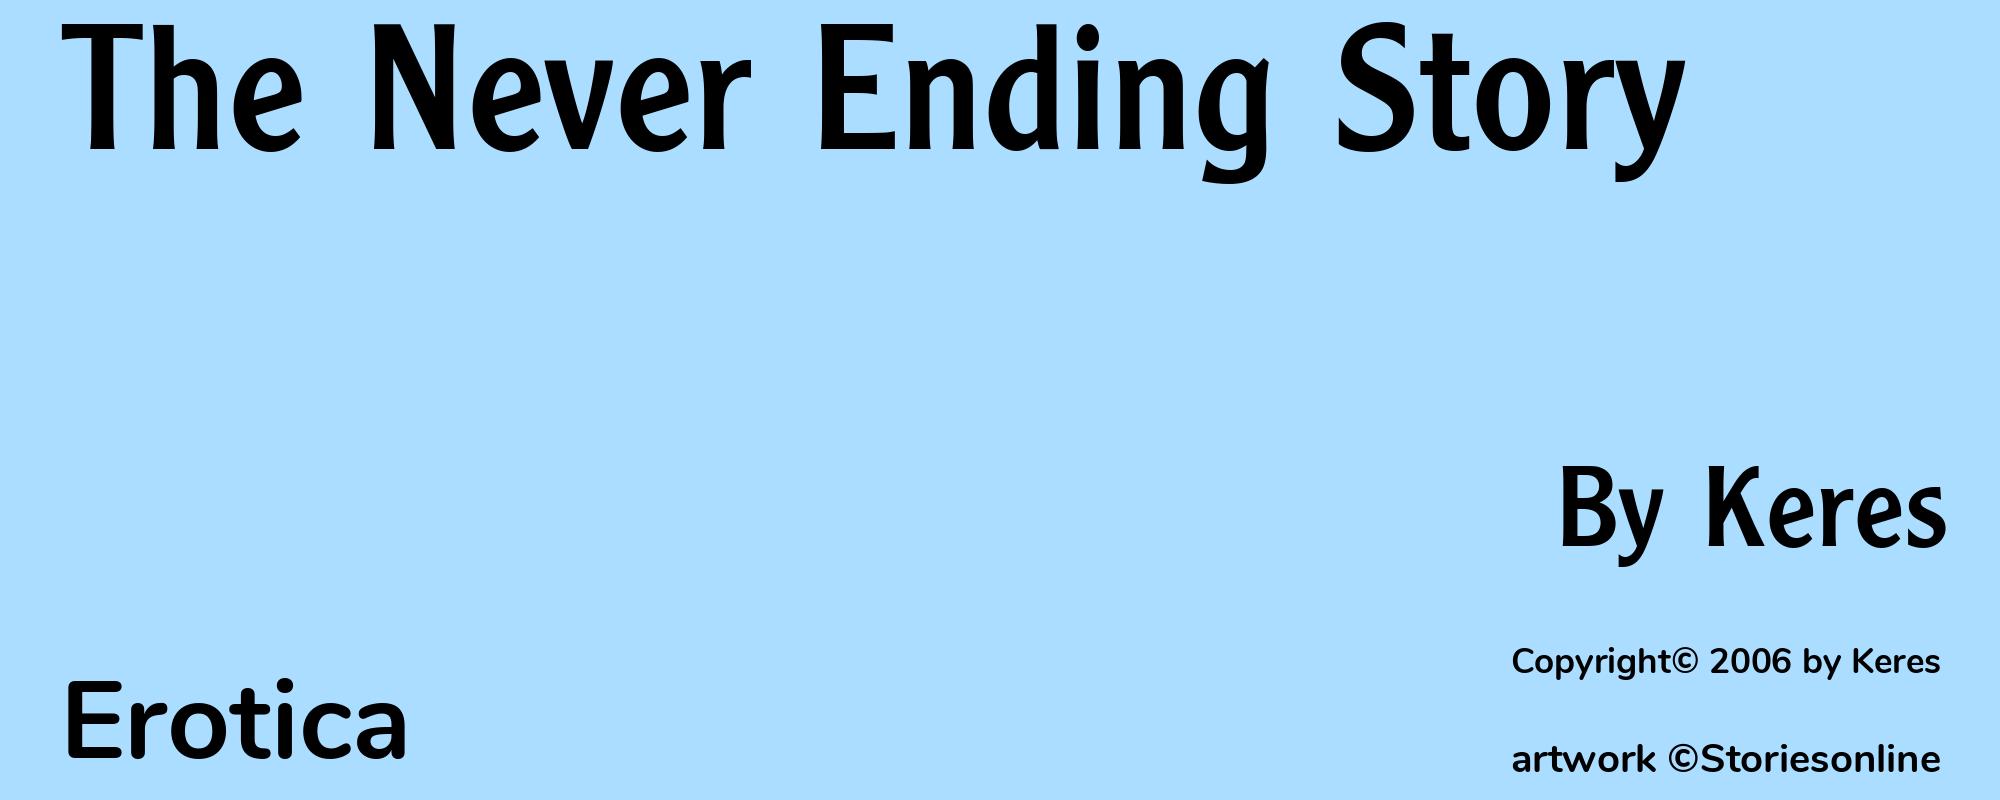 The Never Ending Story - Cover